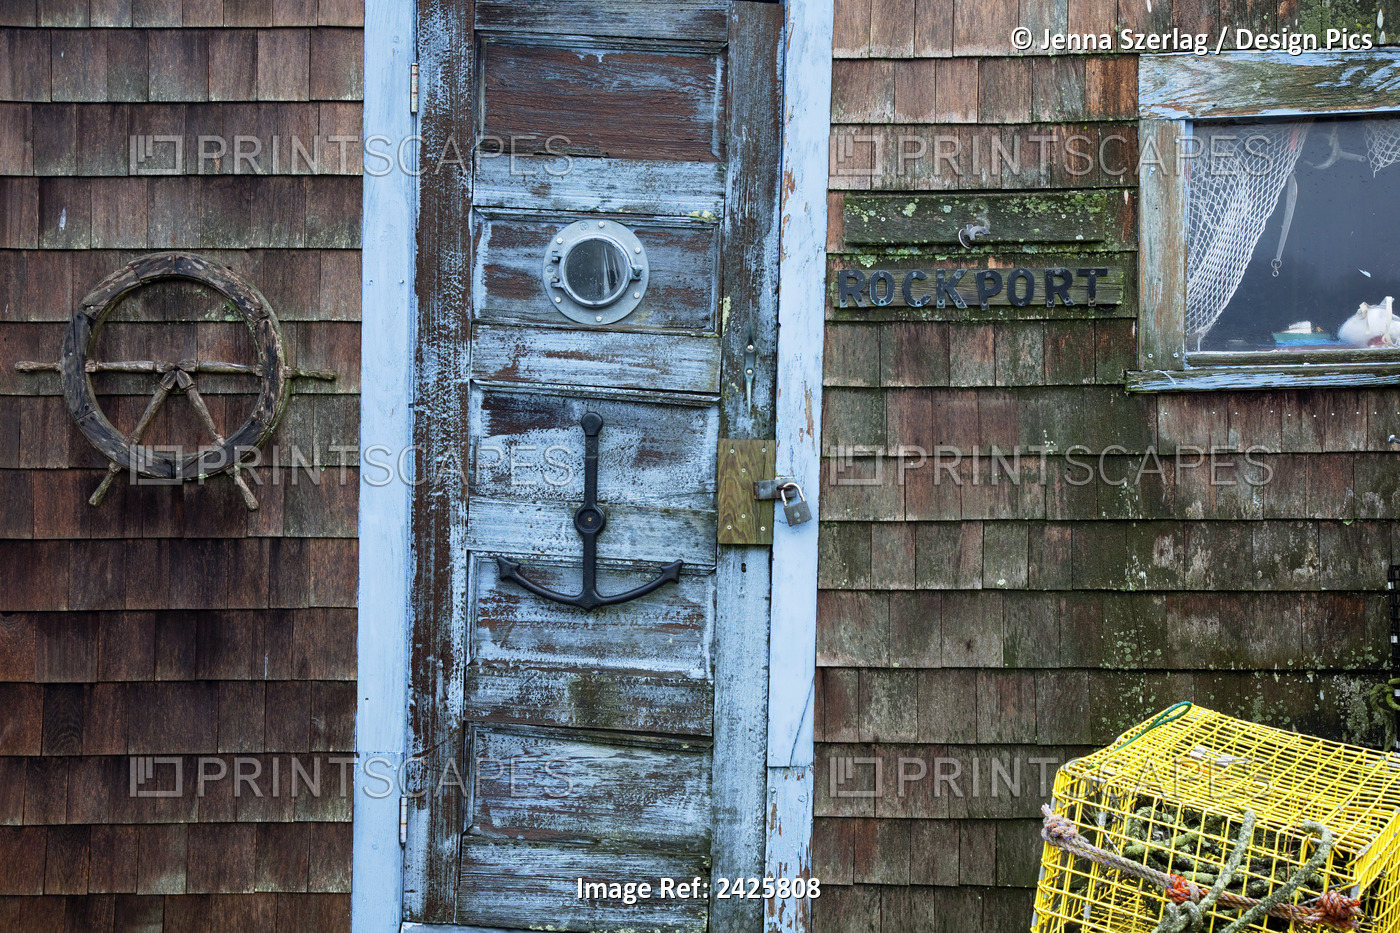 Massachusetts, Rockport, A Quaint Shack At The Harbor With Sign.